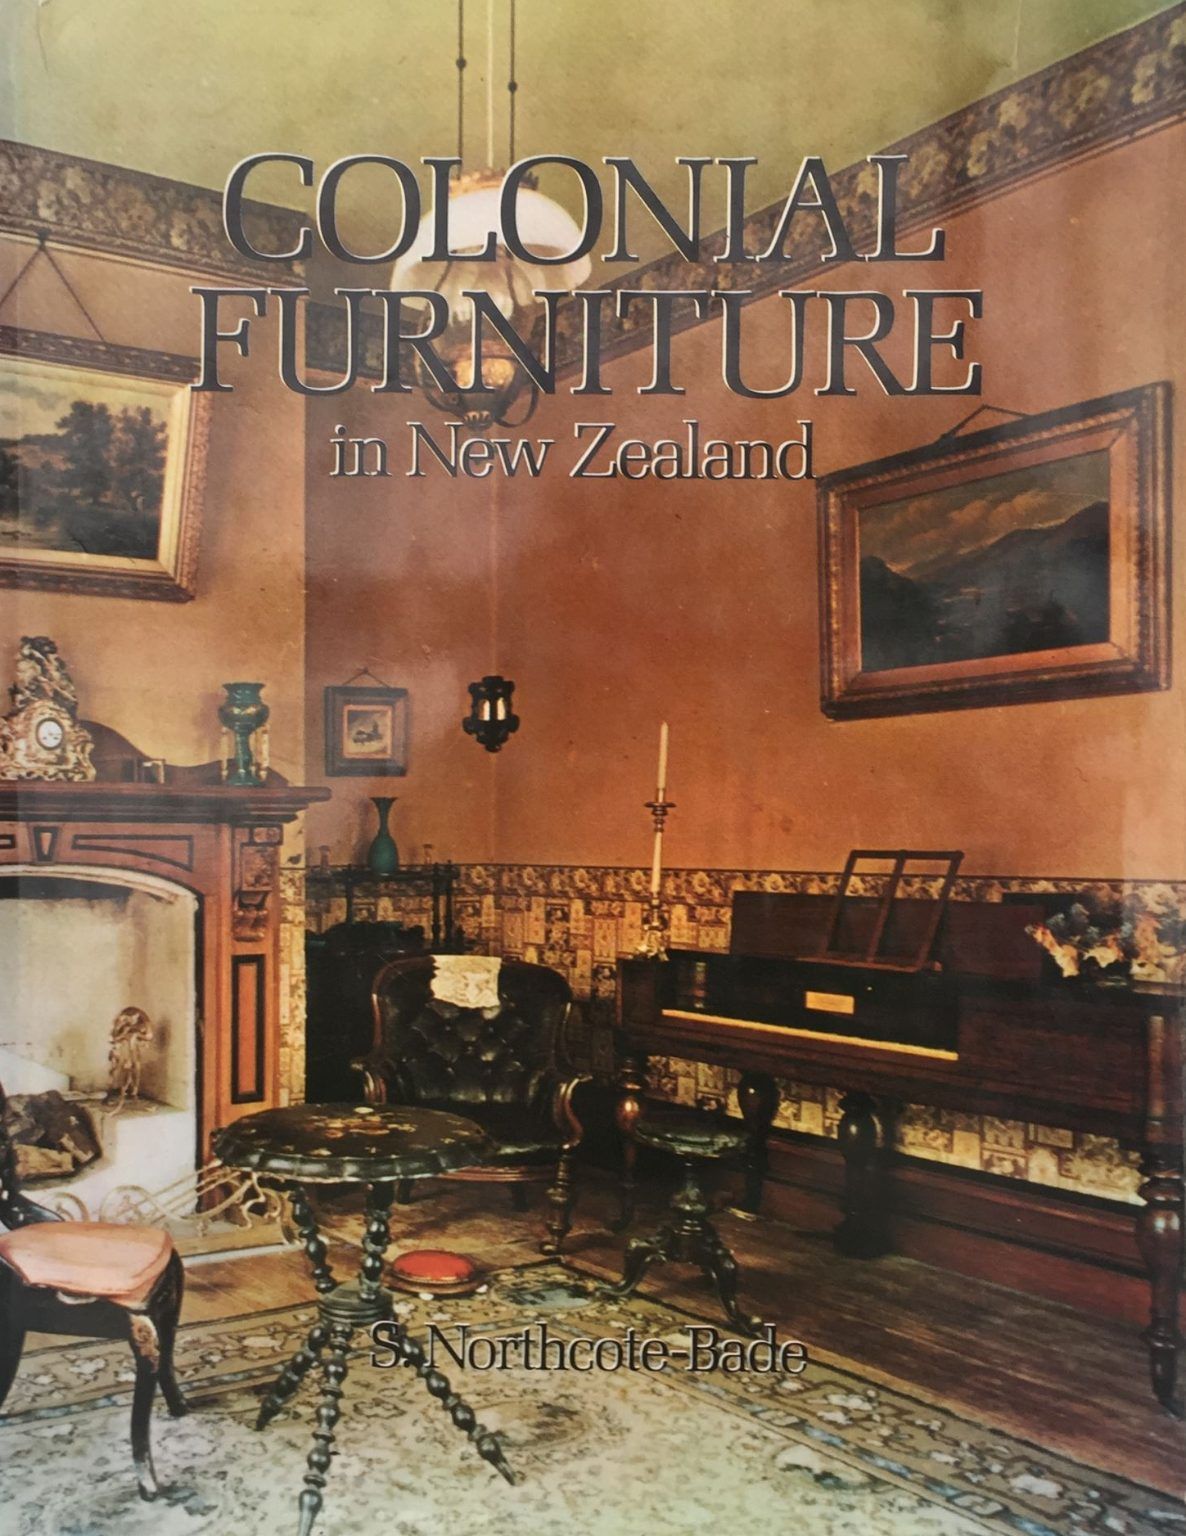 COLONIAL FURNITURE IN NEW ZEALAND